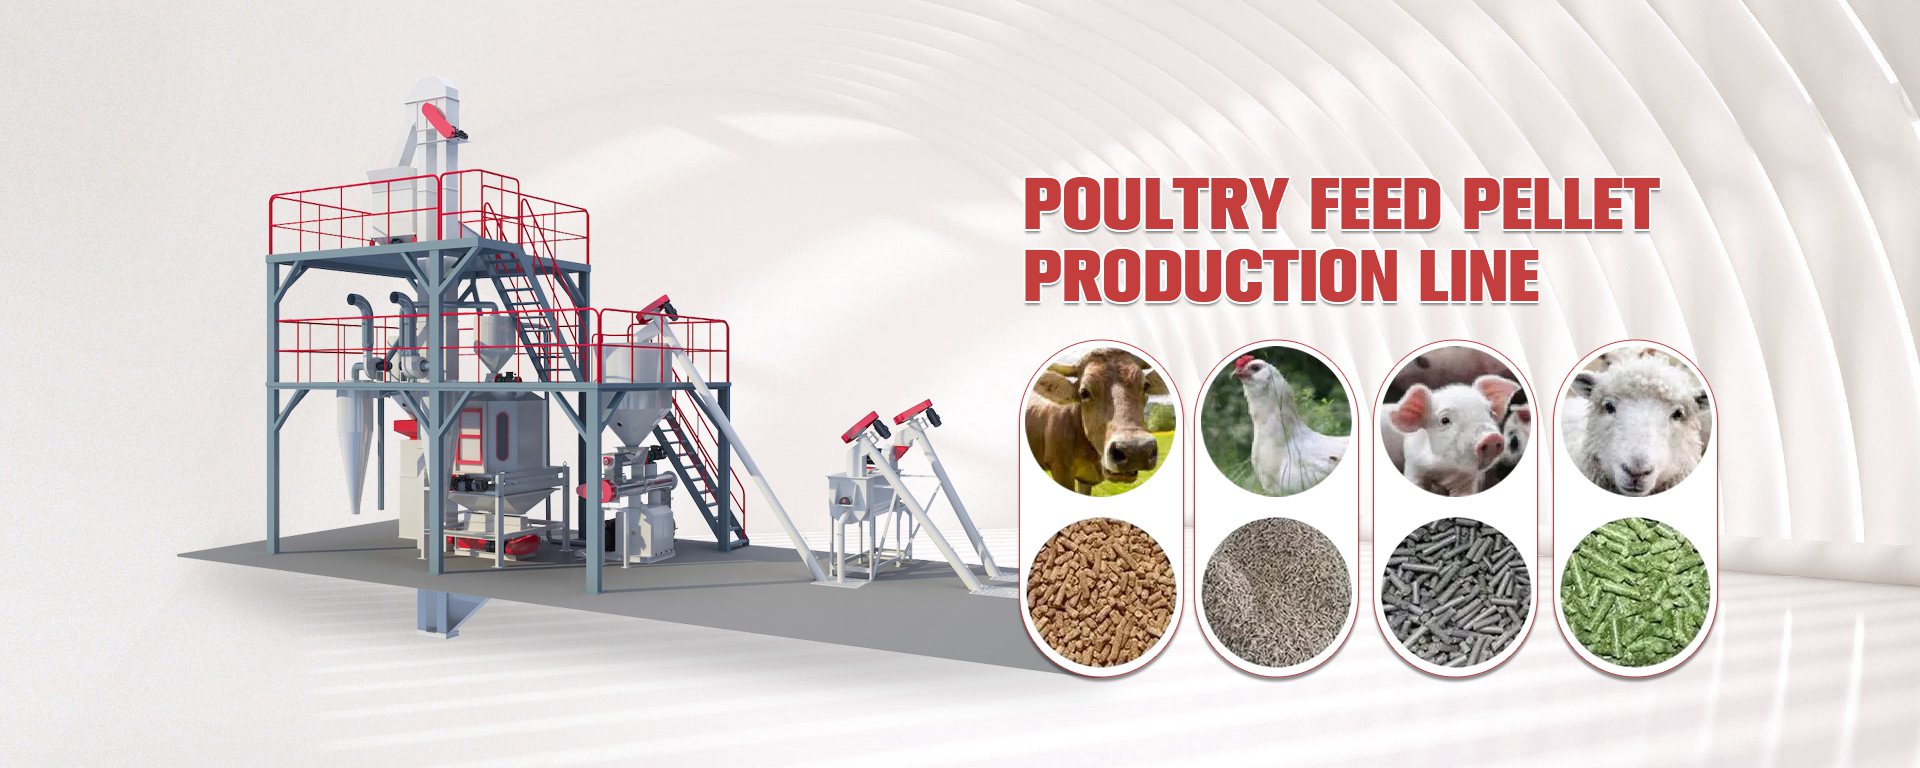 Poultry feed pellet production line